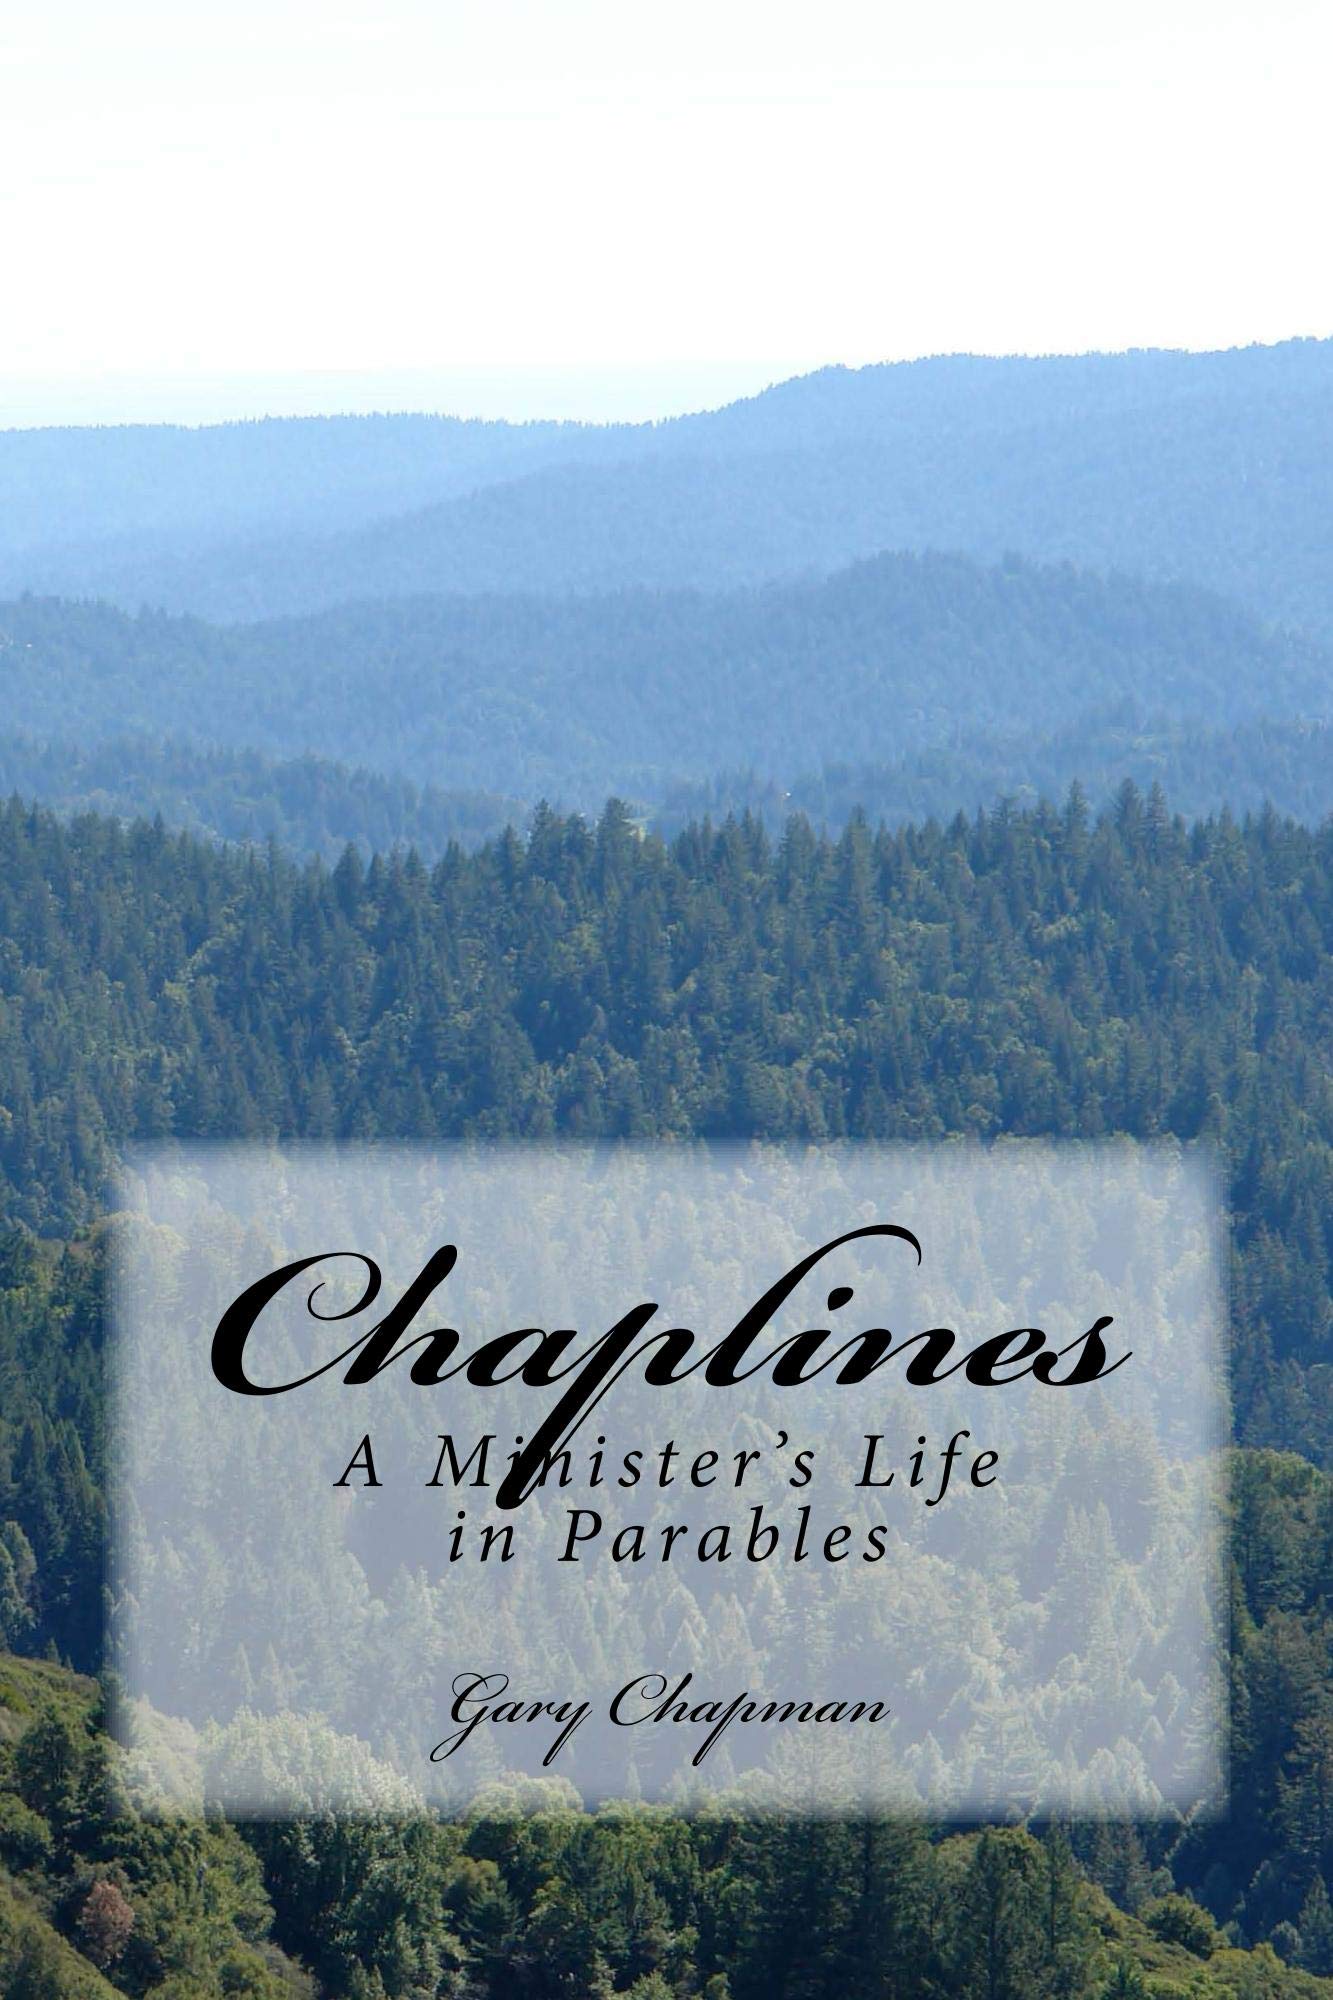 Chaplines: A Minister's Life in Parables (A Family's Heritage Book 4)